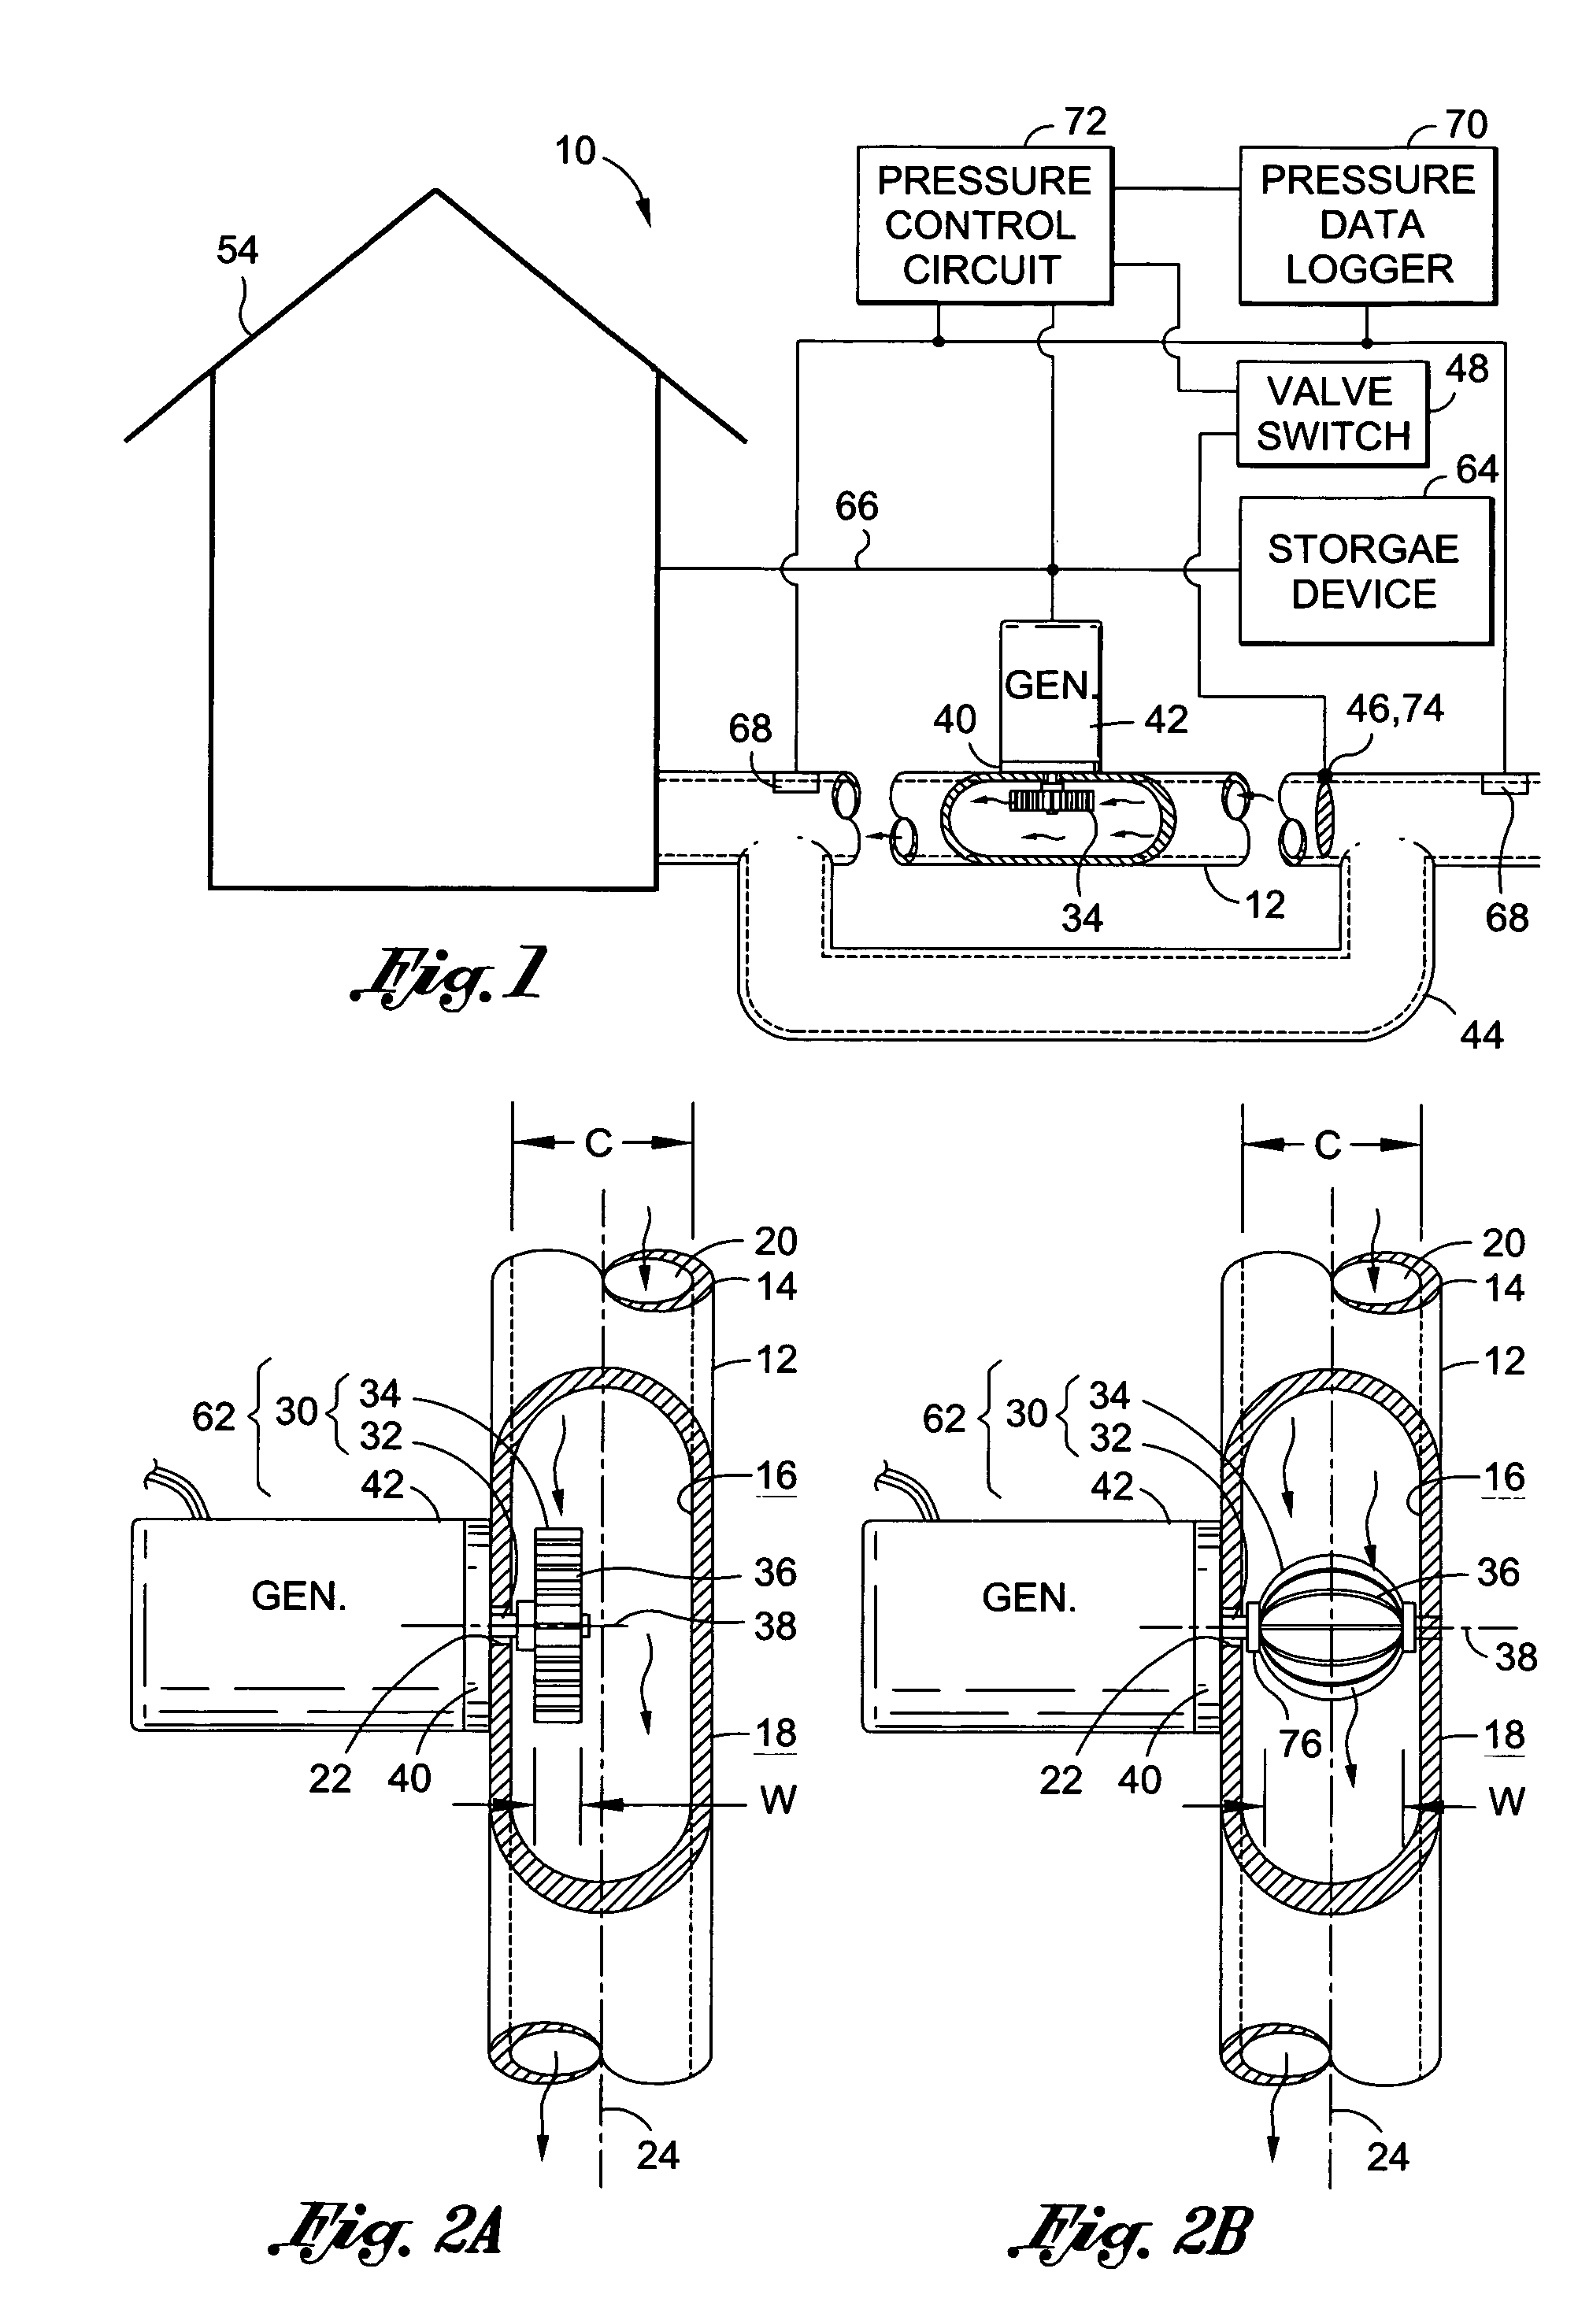 Flow generator for use in connection with a utility conduit